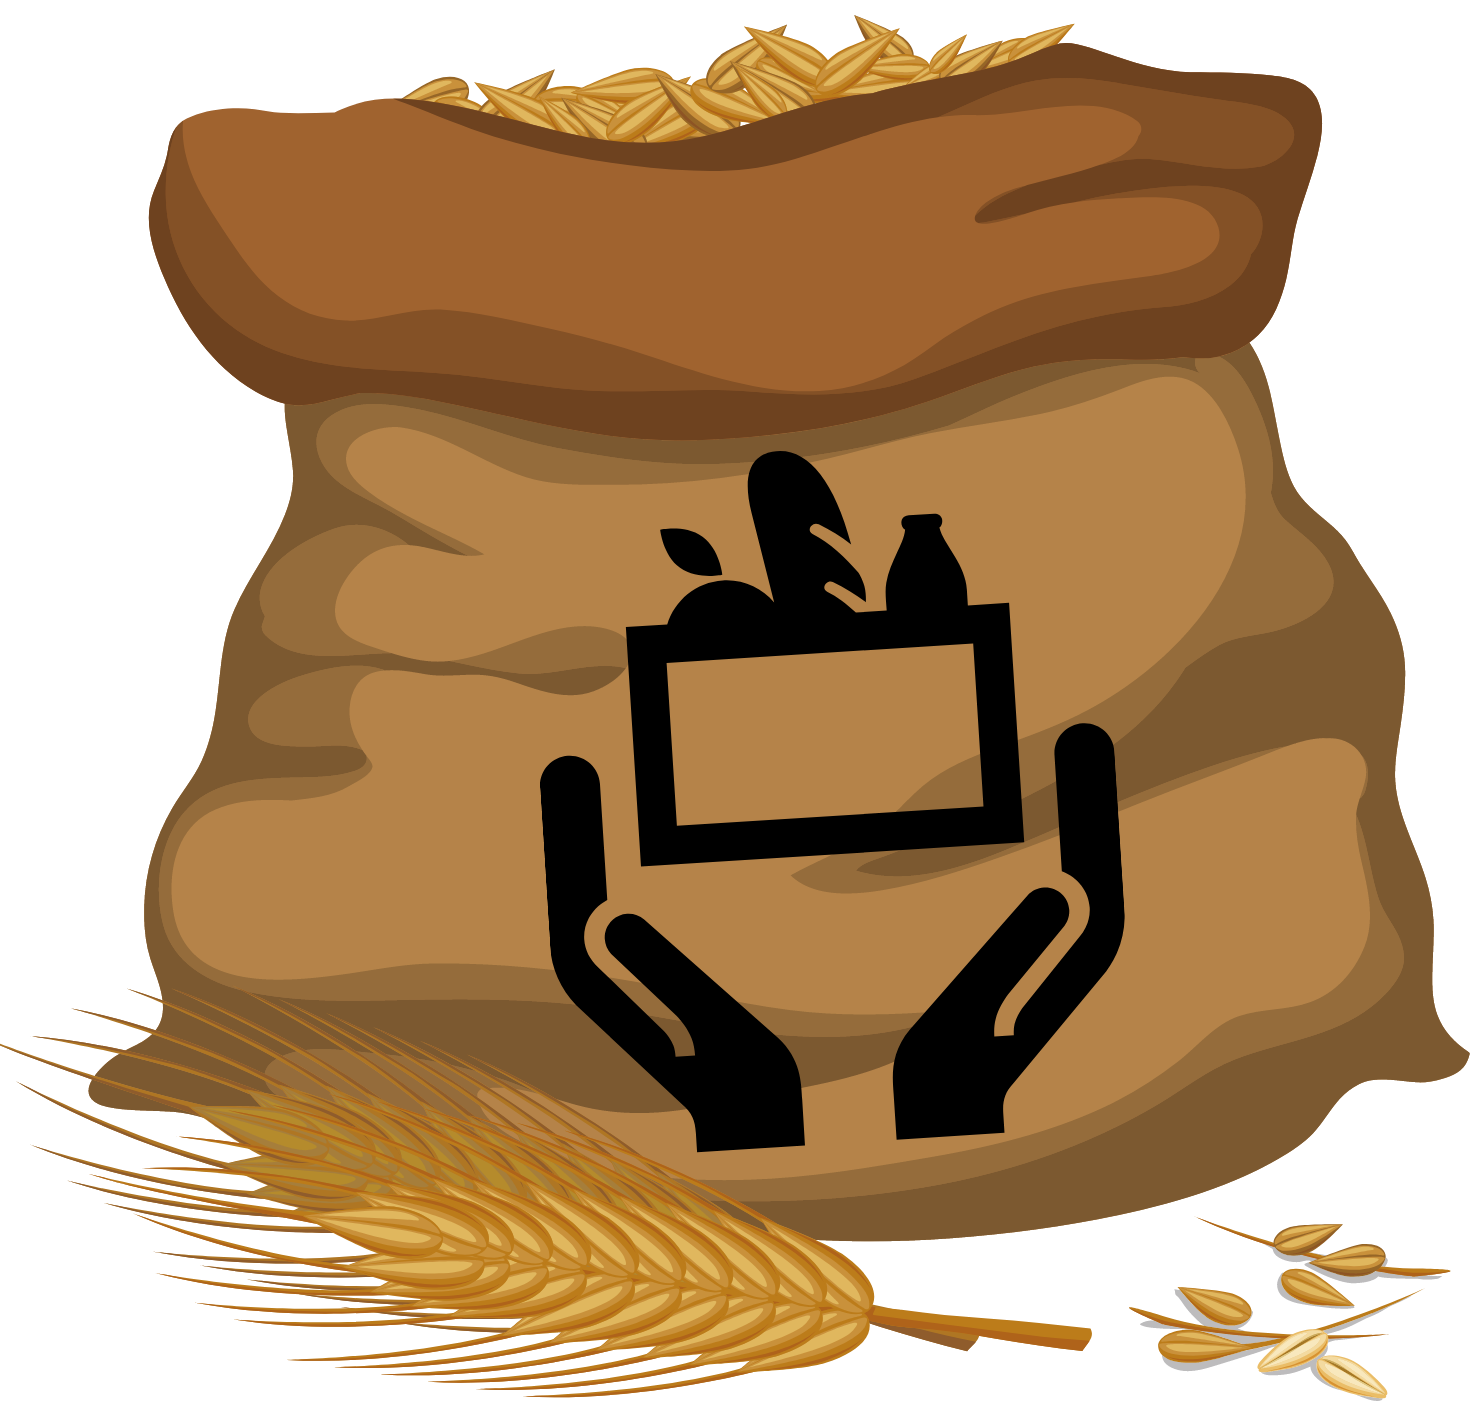 Bag of grain with an image stamped on it of hands offering a box of food 